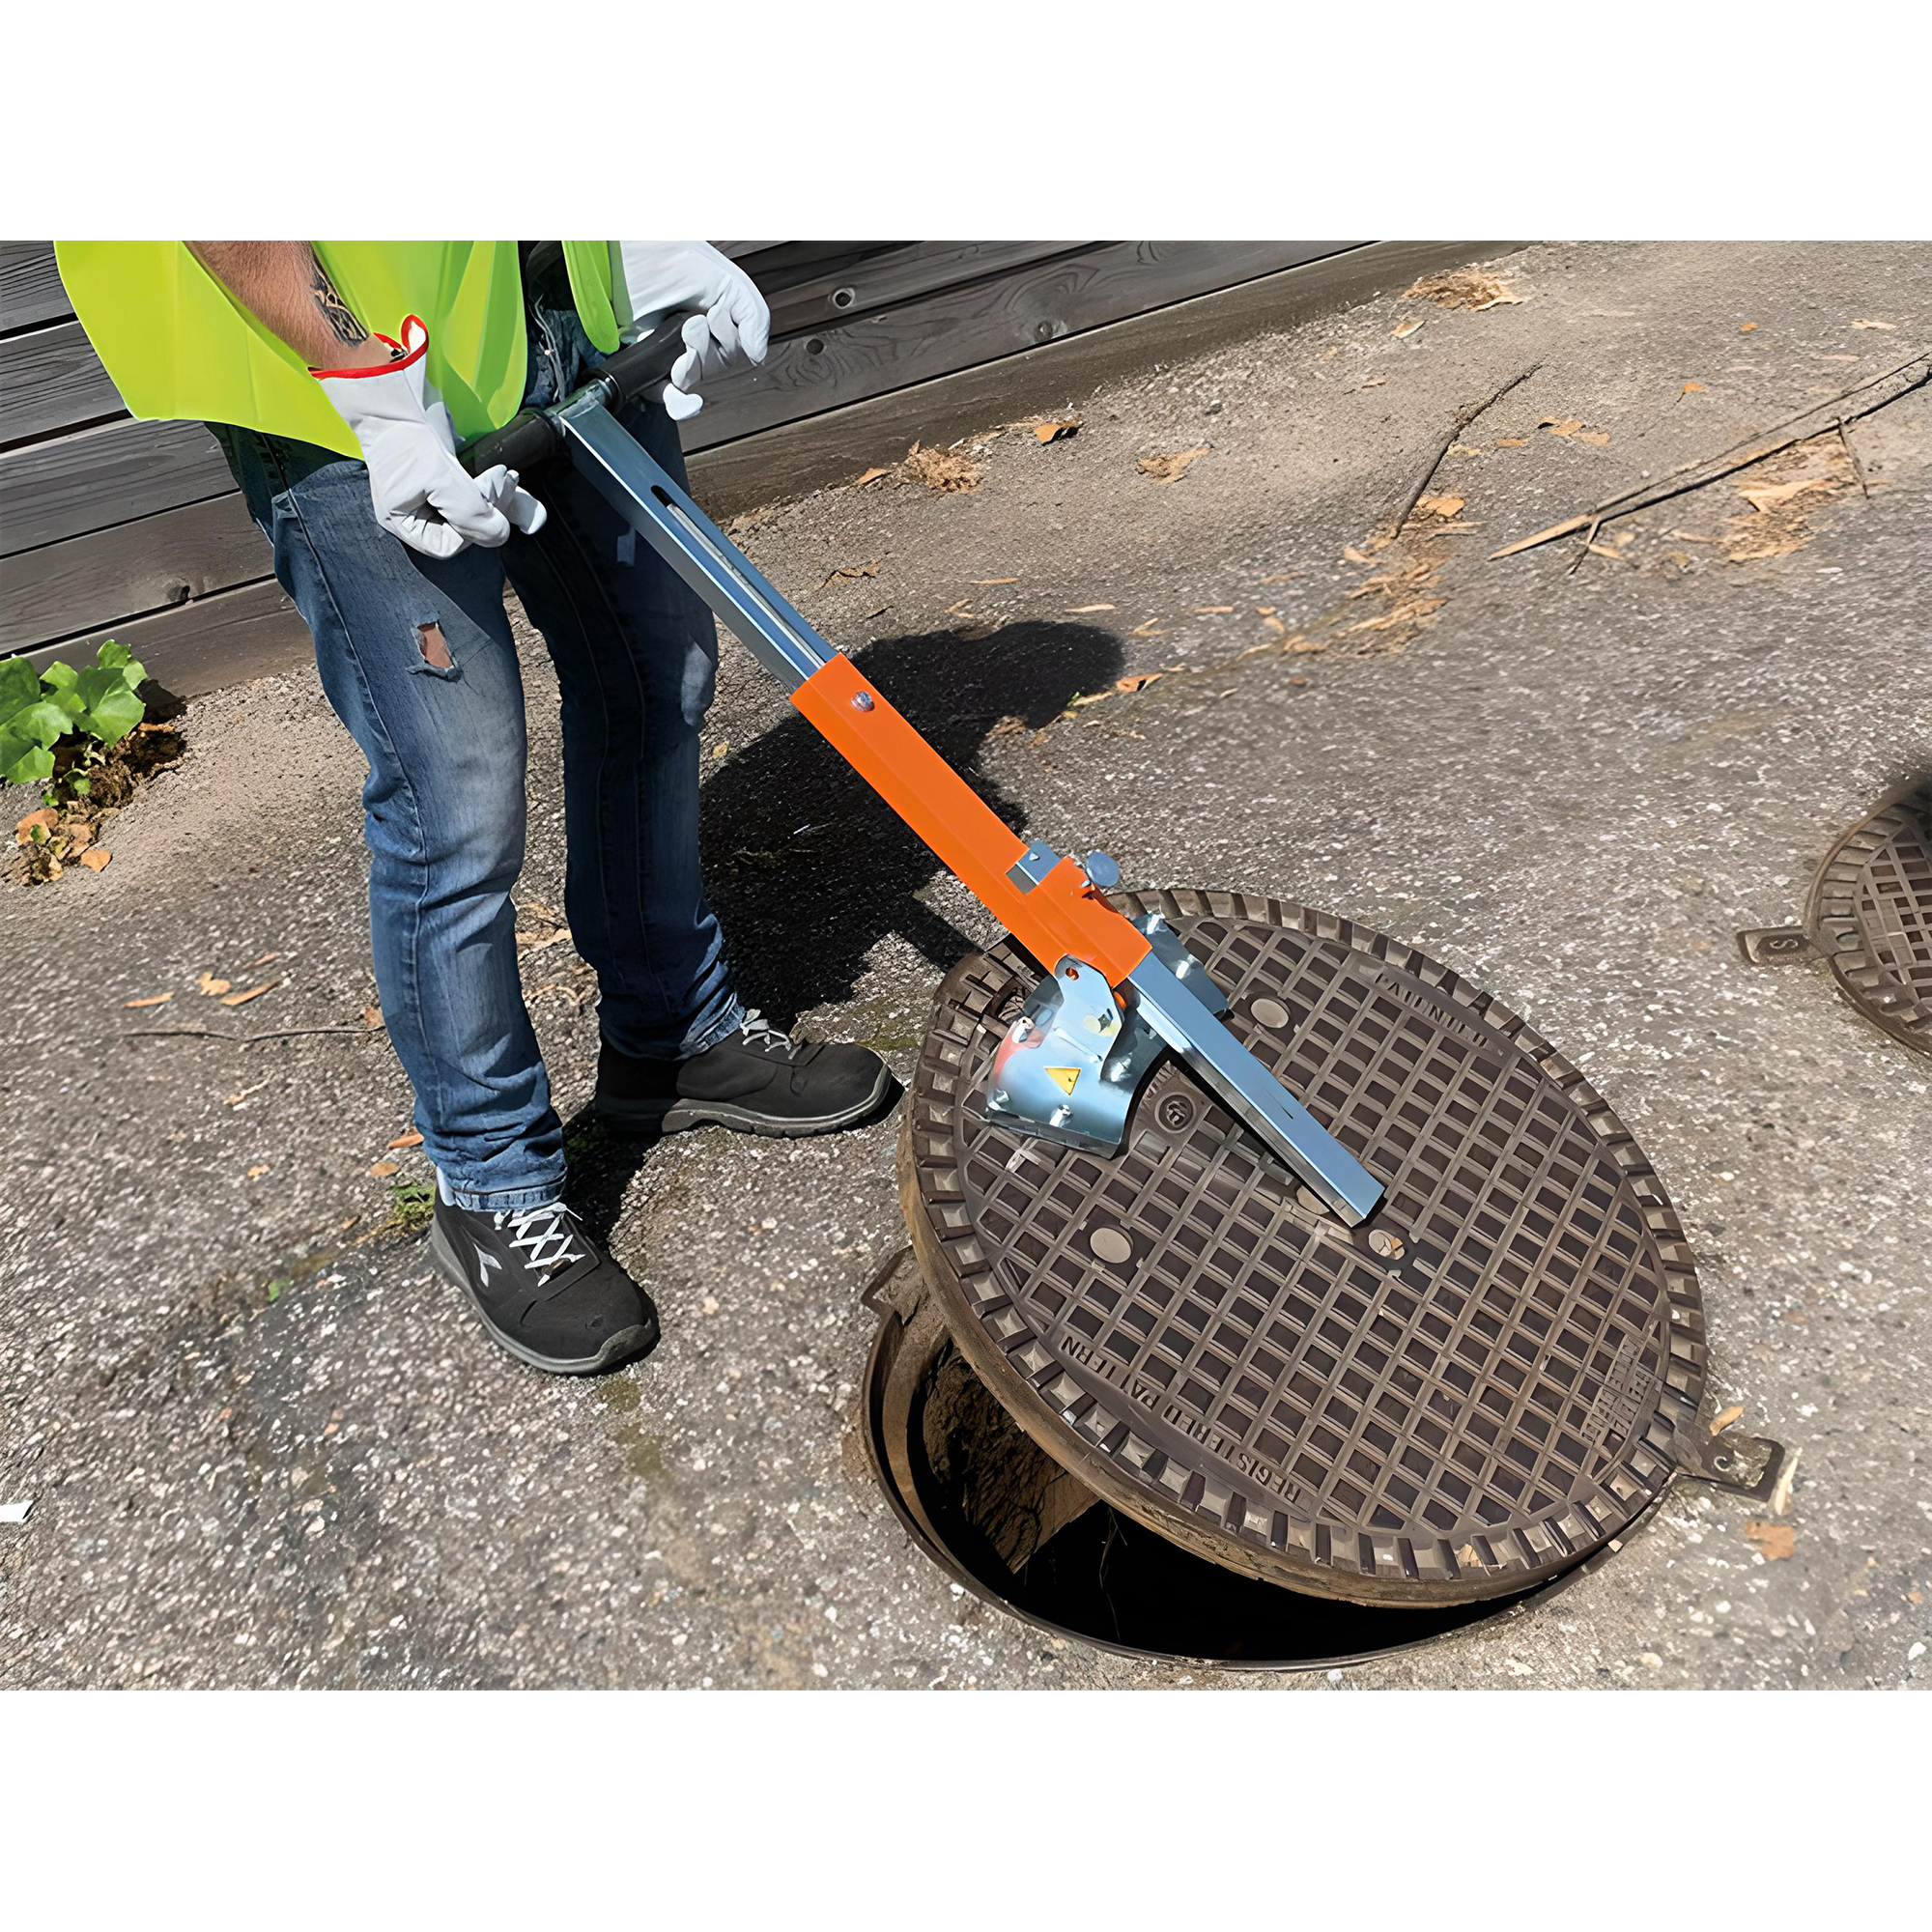 CL11 Curved Base Magnetic Manhole Lifter